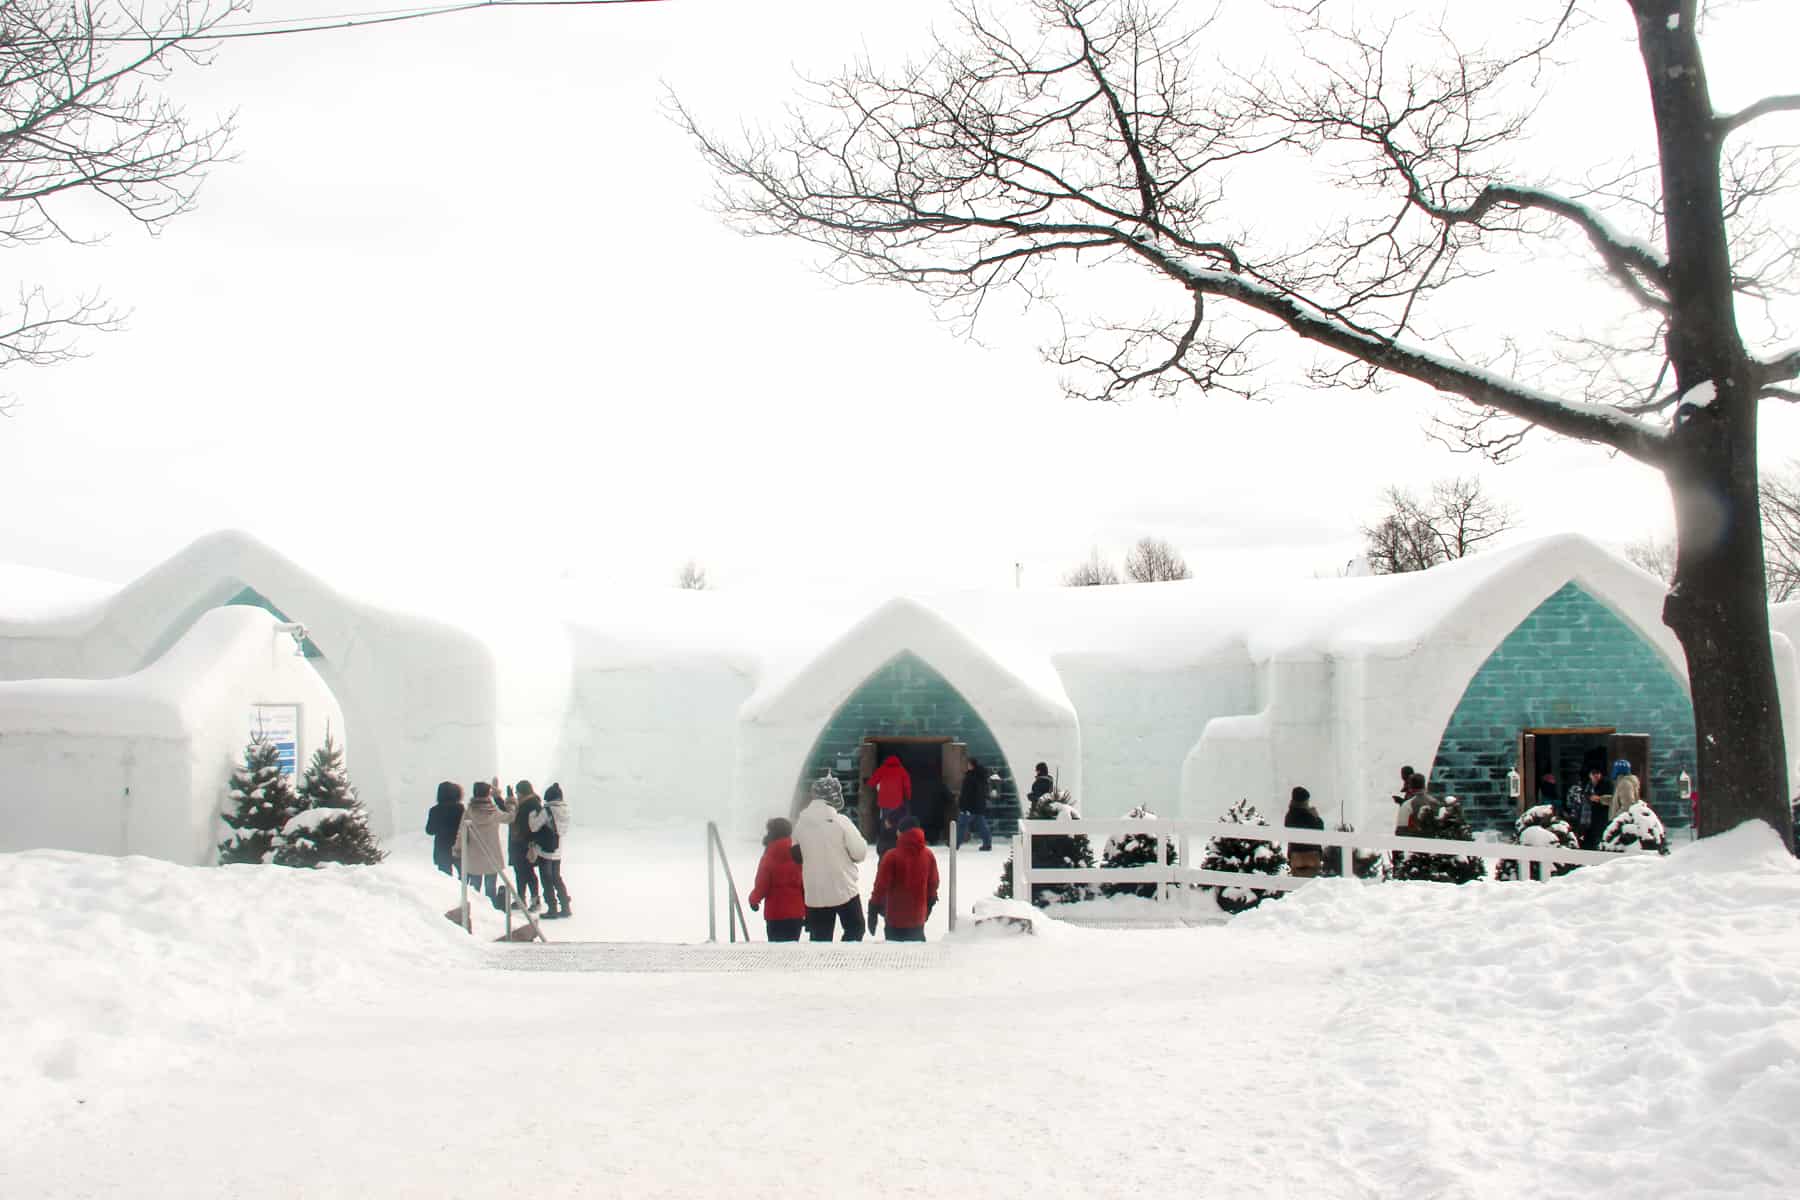 People walking towards the bright white and blue ice exterior of Quebec's ice hotel, Hôtel de Glace.